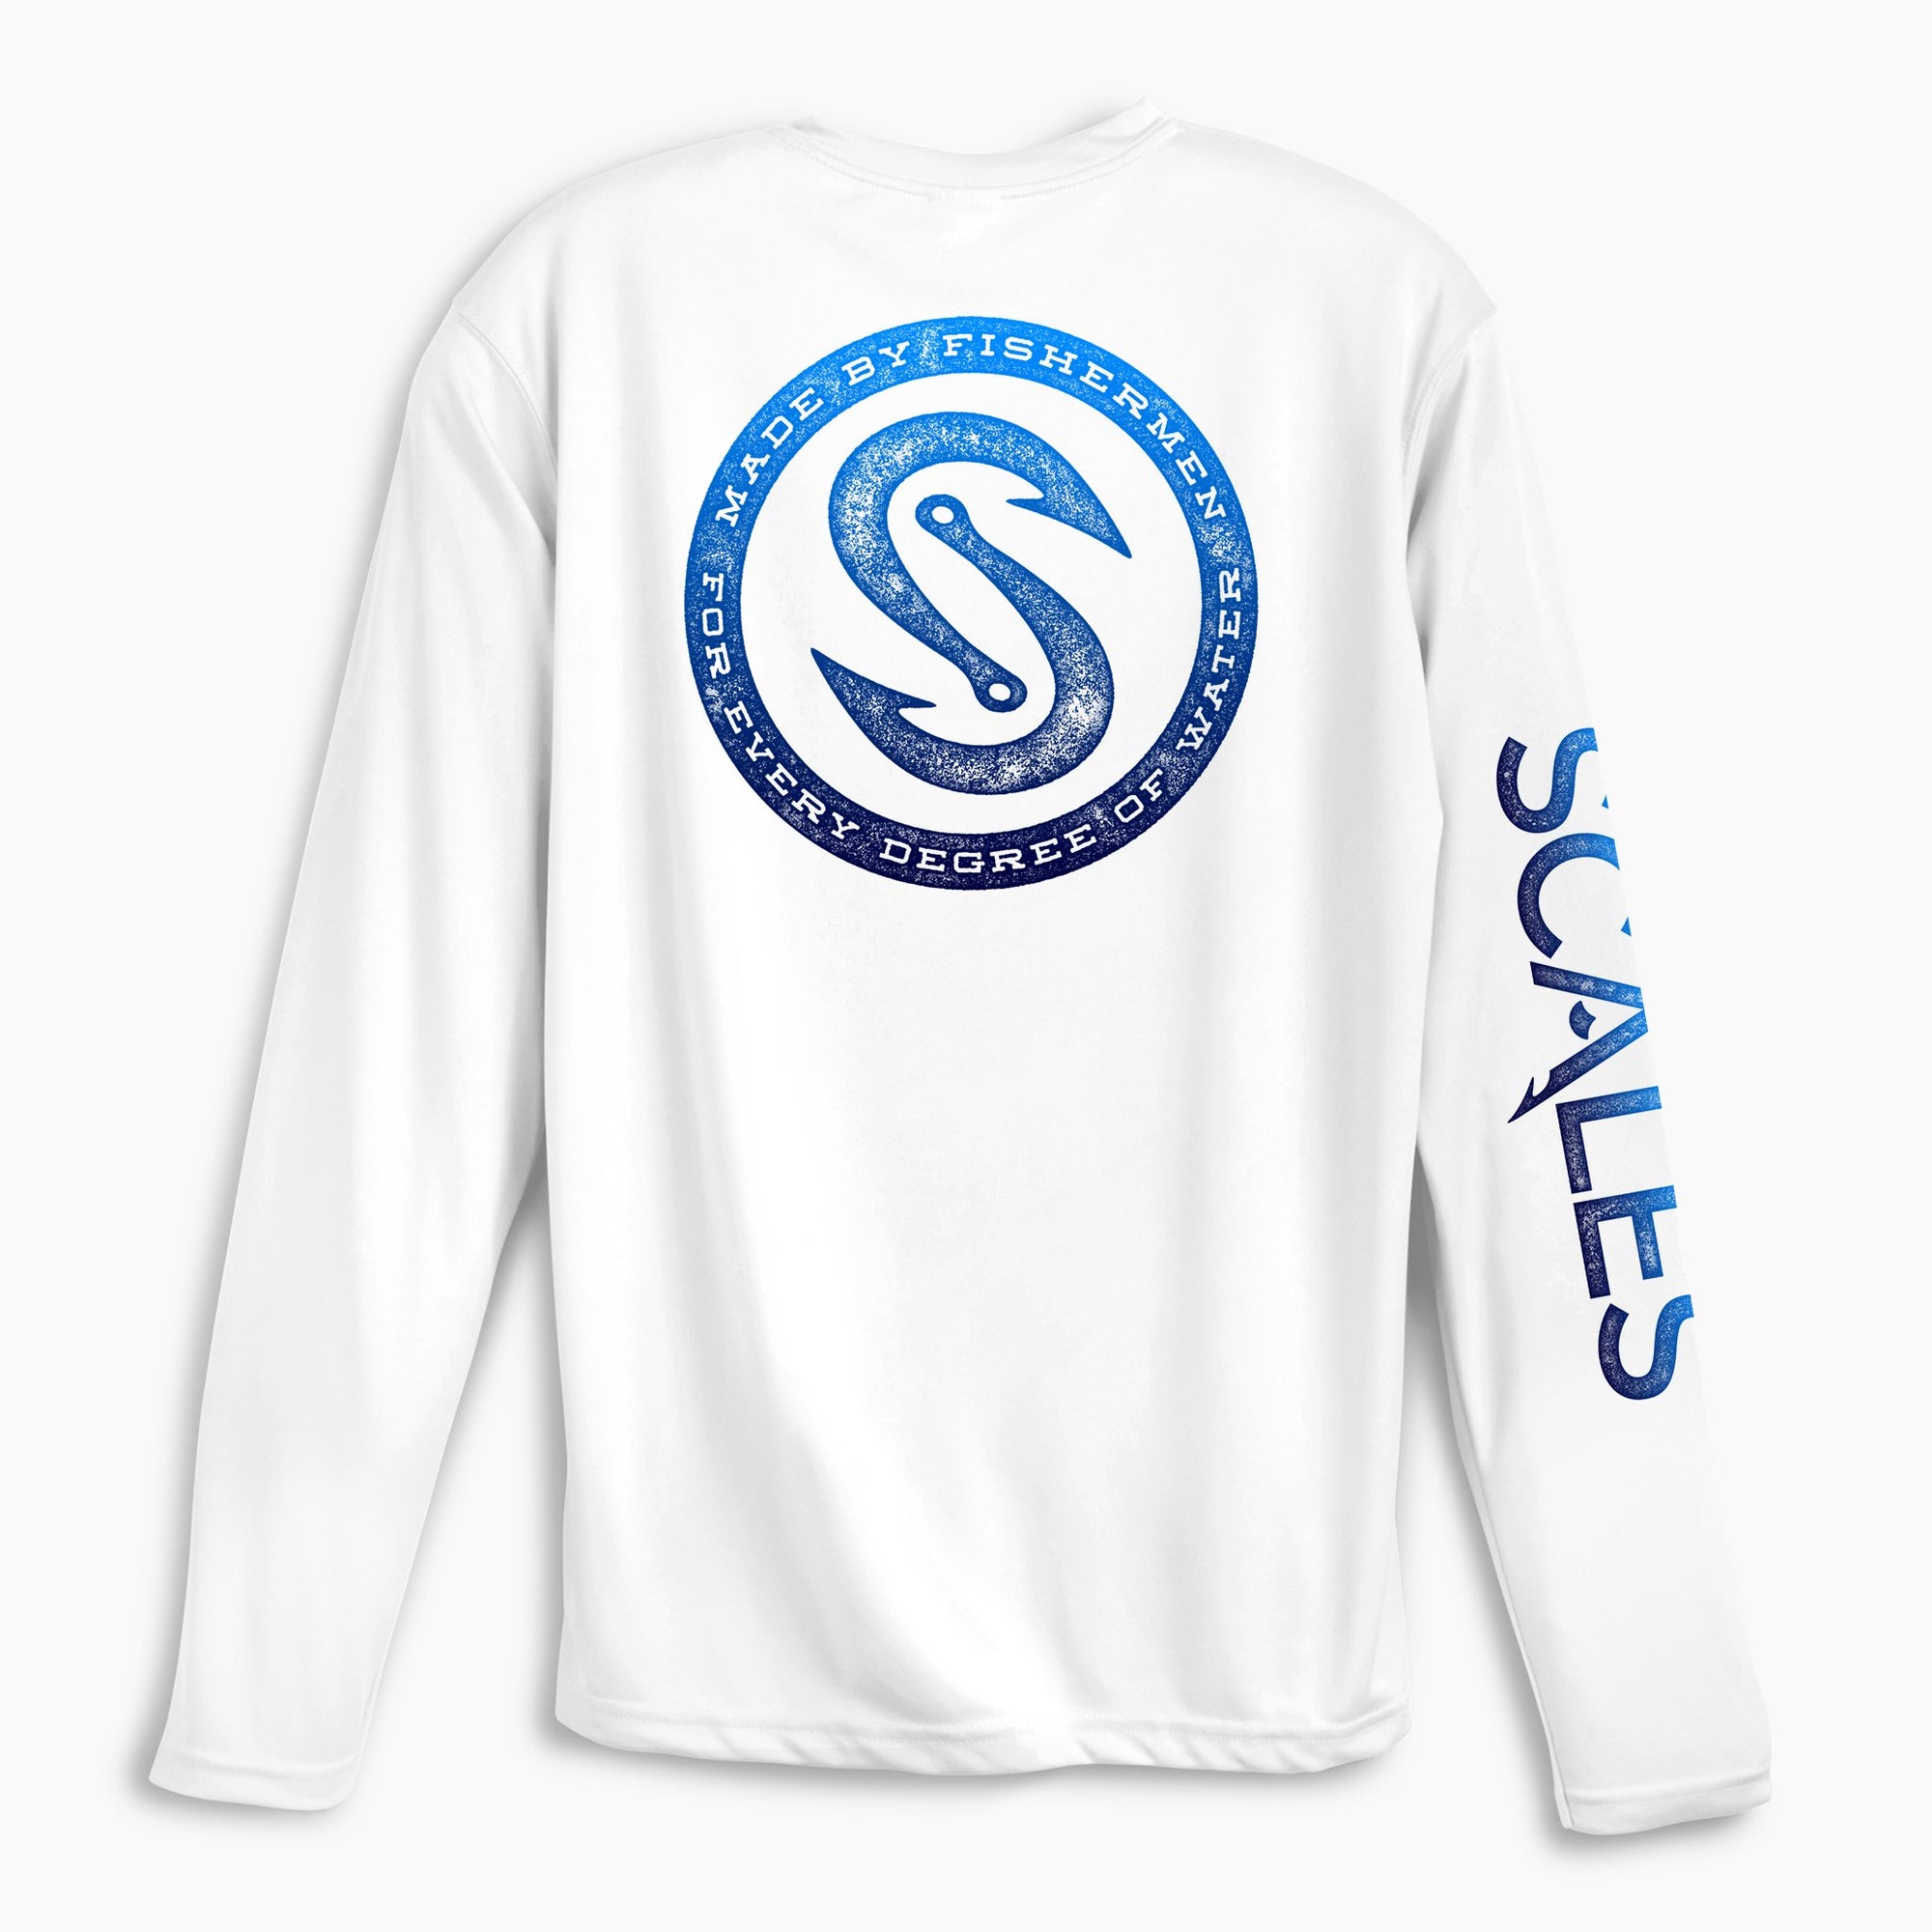 Scales Gear Pro Performance Every Degree Crew White Shirt - Rear View